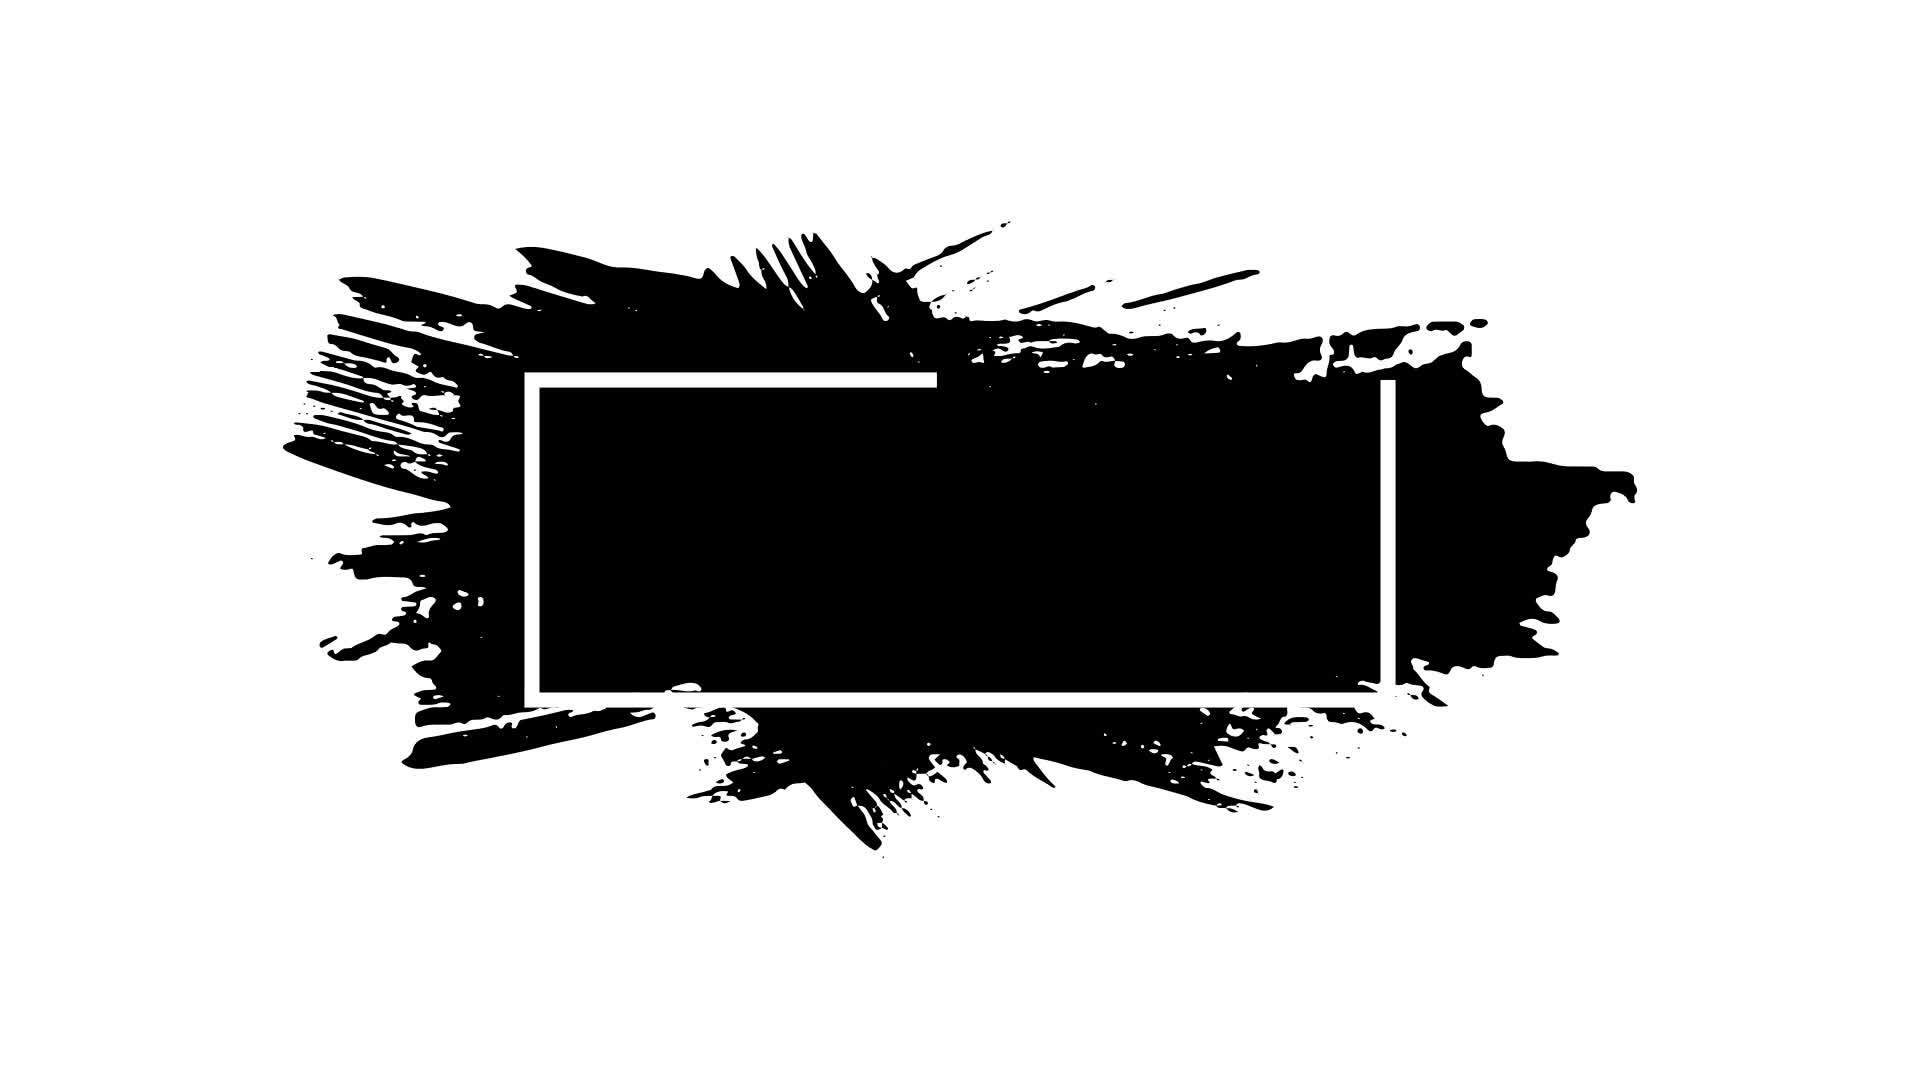 https://static.vecteezy.com/system/resources/thumbnails/026/720/692/original/abstract-black-brush-stroke-animation-for-text-effect-painting-black-brush-grunge-background-for-titles-or-other-your-text-with-alpha-channel-free-video.jpg